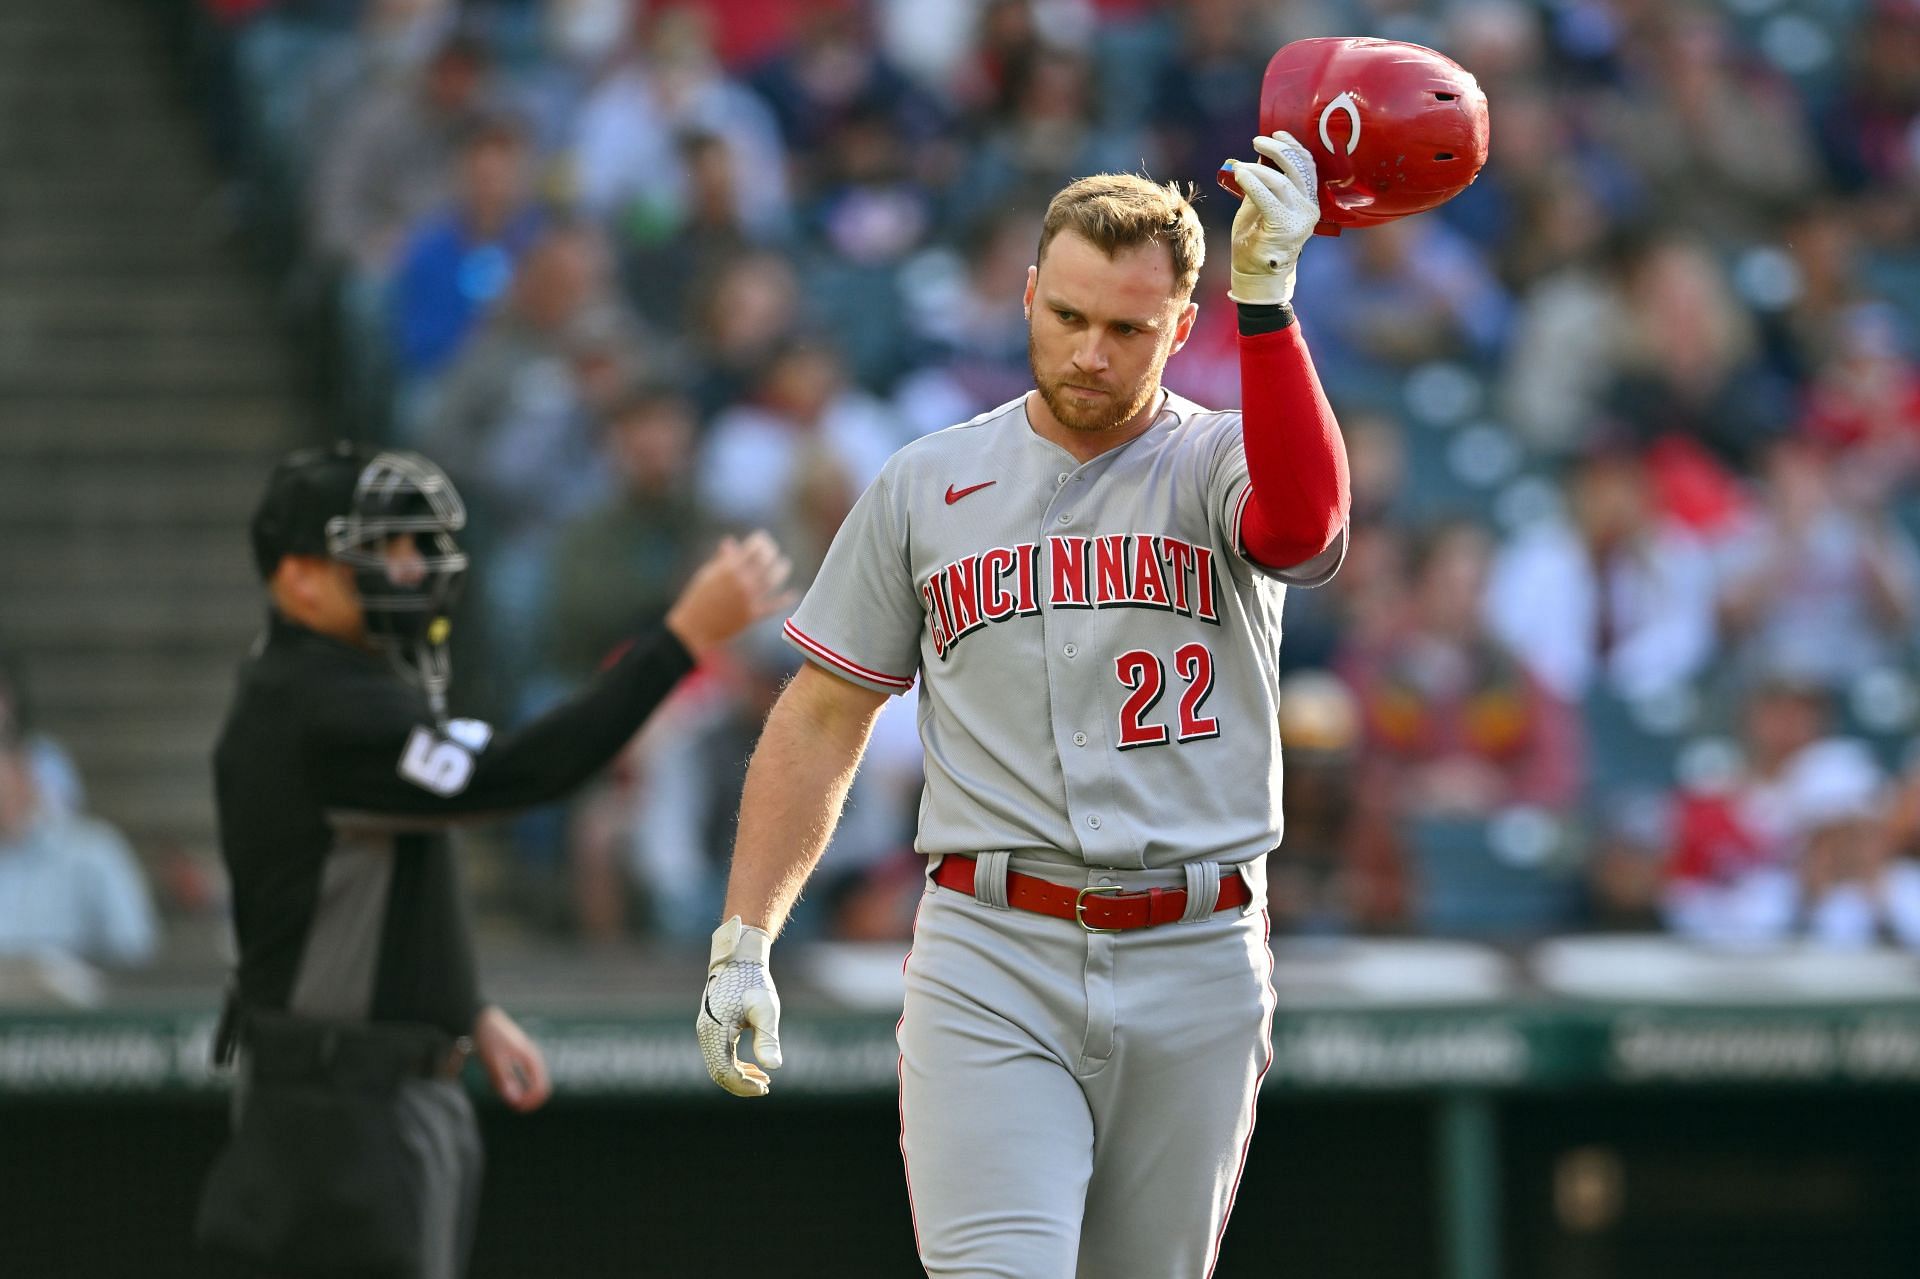 From the Cincinnati Reds to the Pittsburgh Pirates, here are 5 MLB